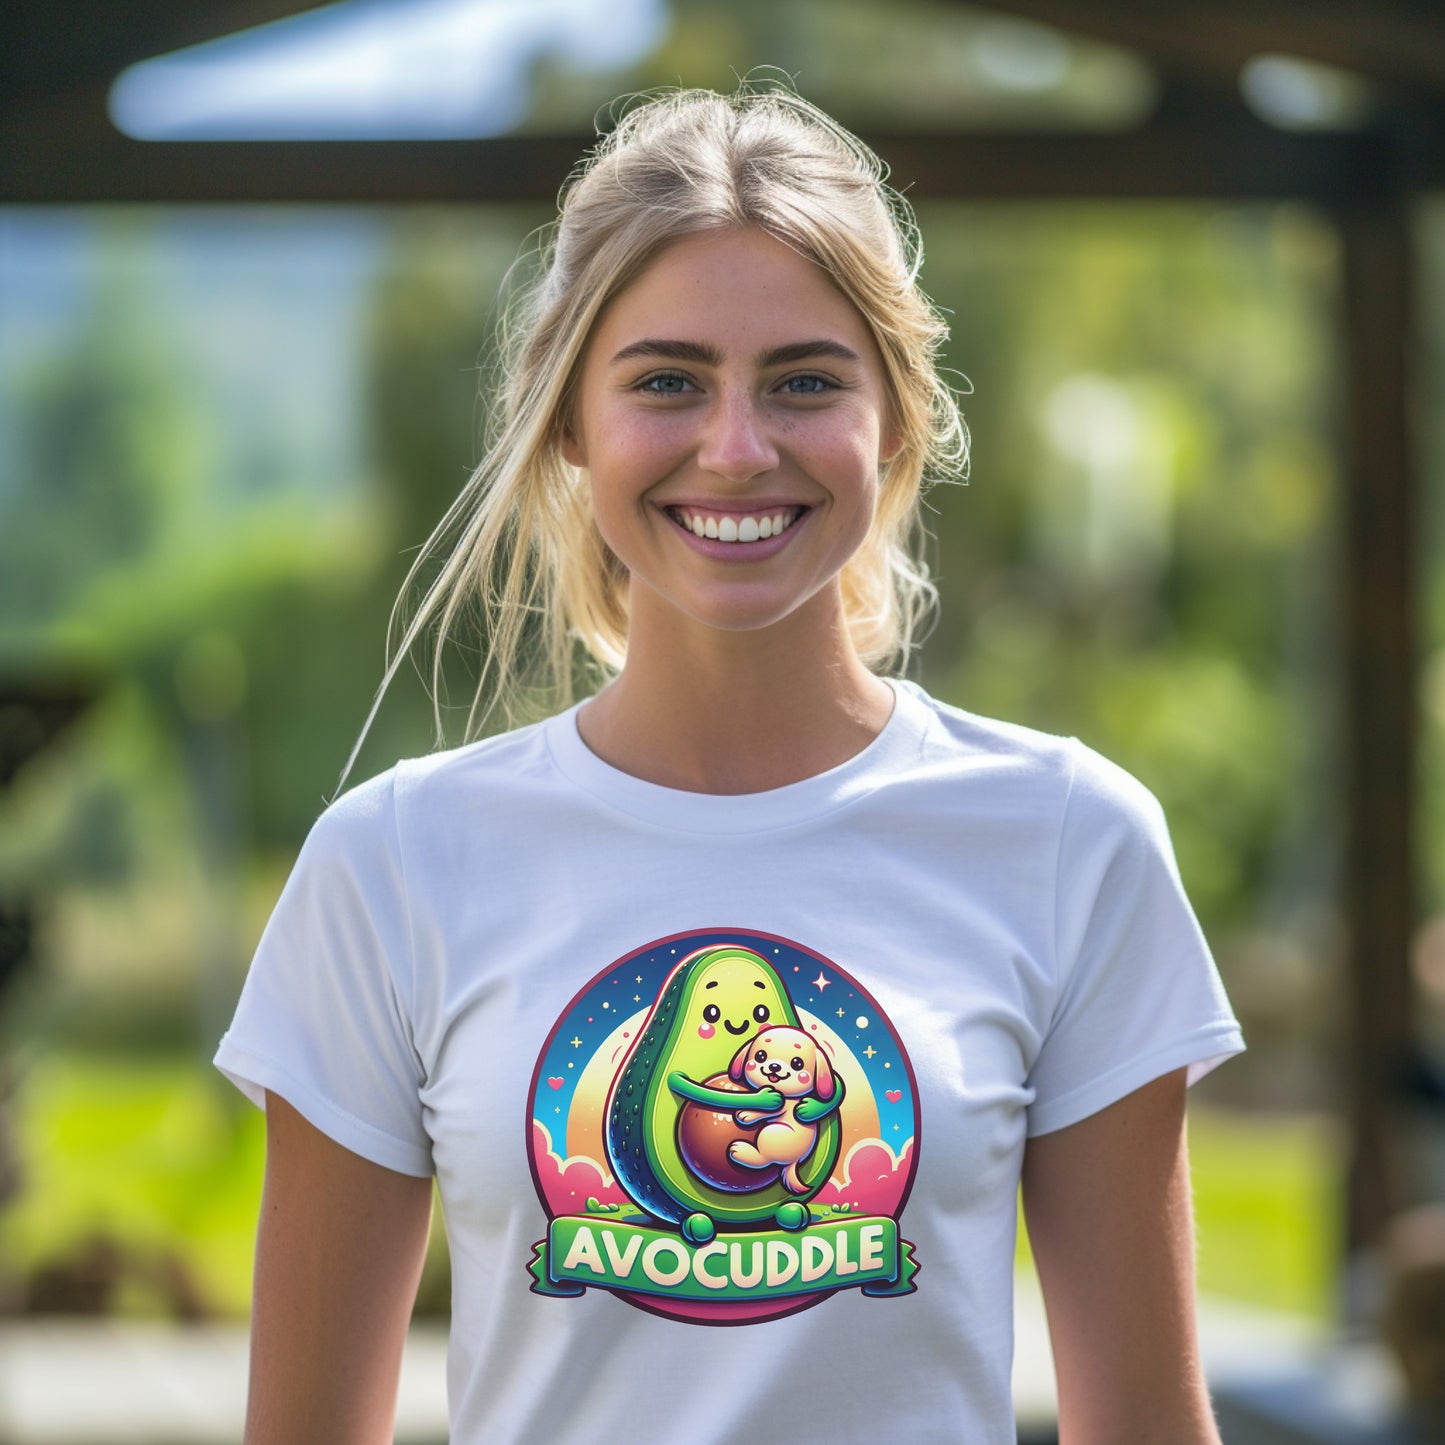 Adorable Avocado and Puppy Love: Novelty T-Shirt for Dog and Avocado Lovers - Blend of Cuteness with a Health Conscious Fashion Statement